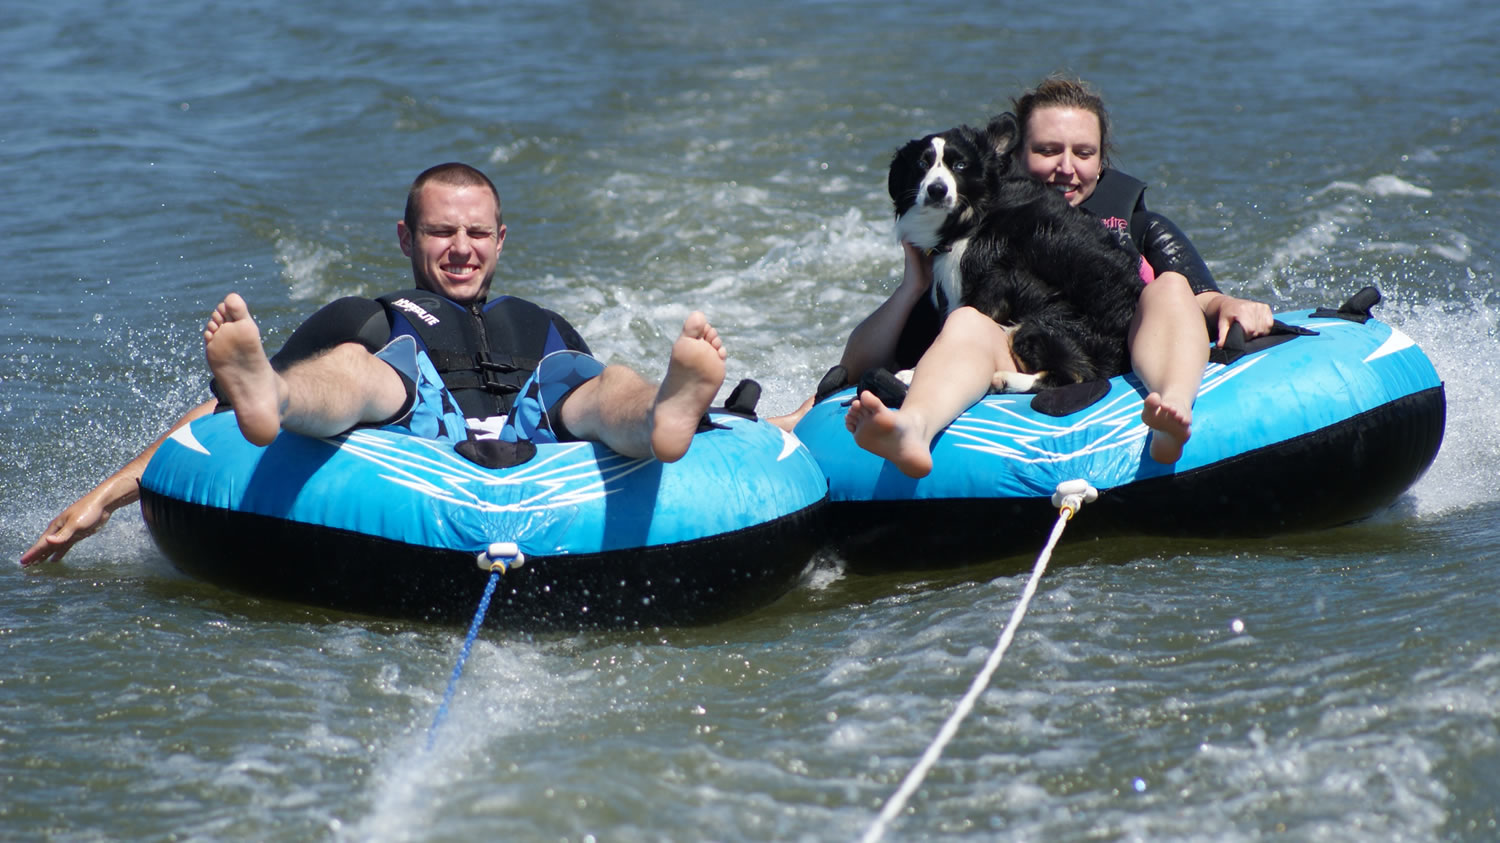 Erin Coburn, right, Stihl, and Coburn's brother, Teddy Coburn, ride on inner tubes towed behind a boat on the Columbia River in July 2011.